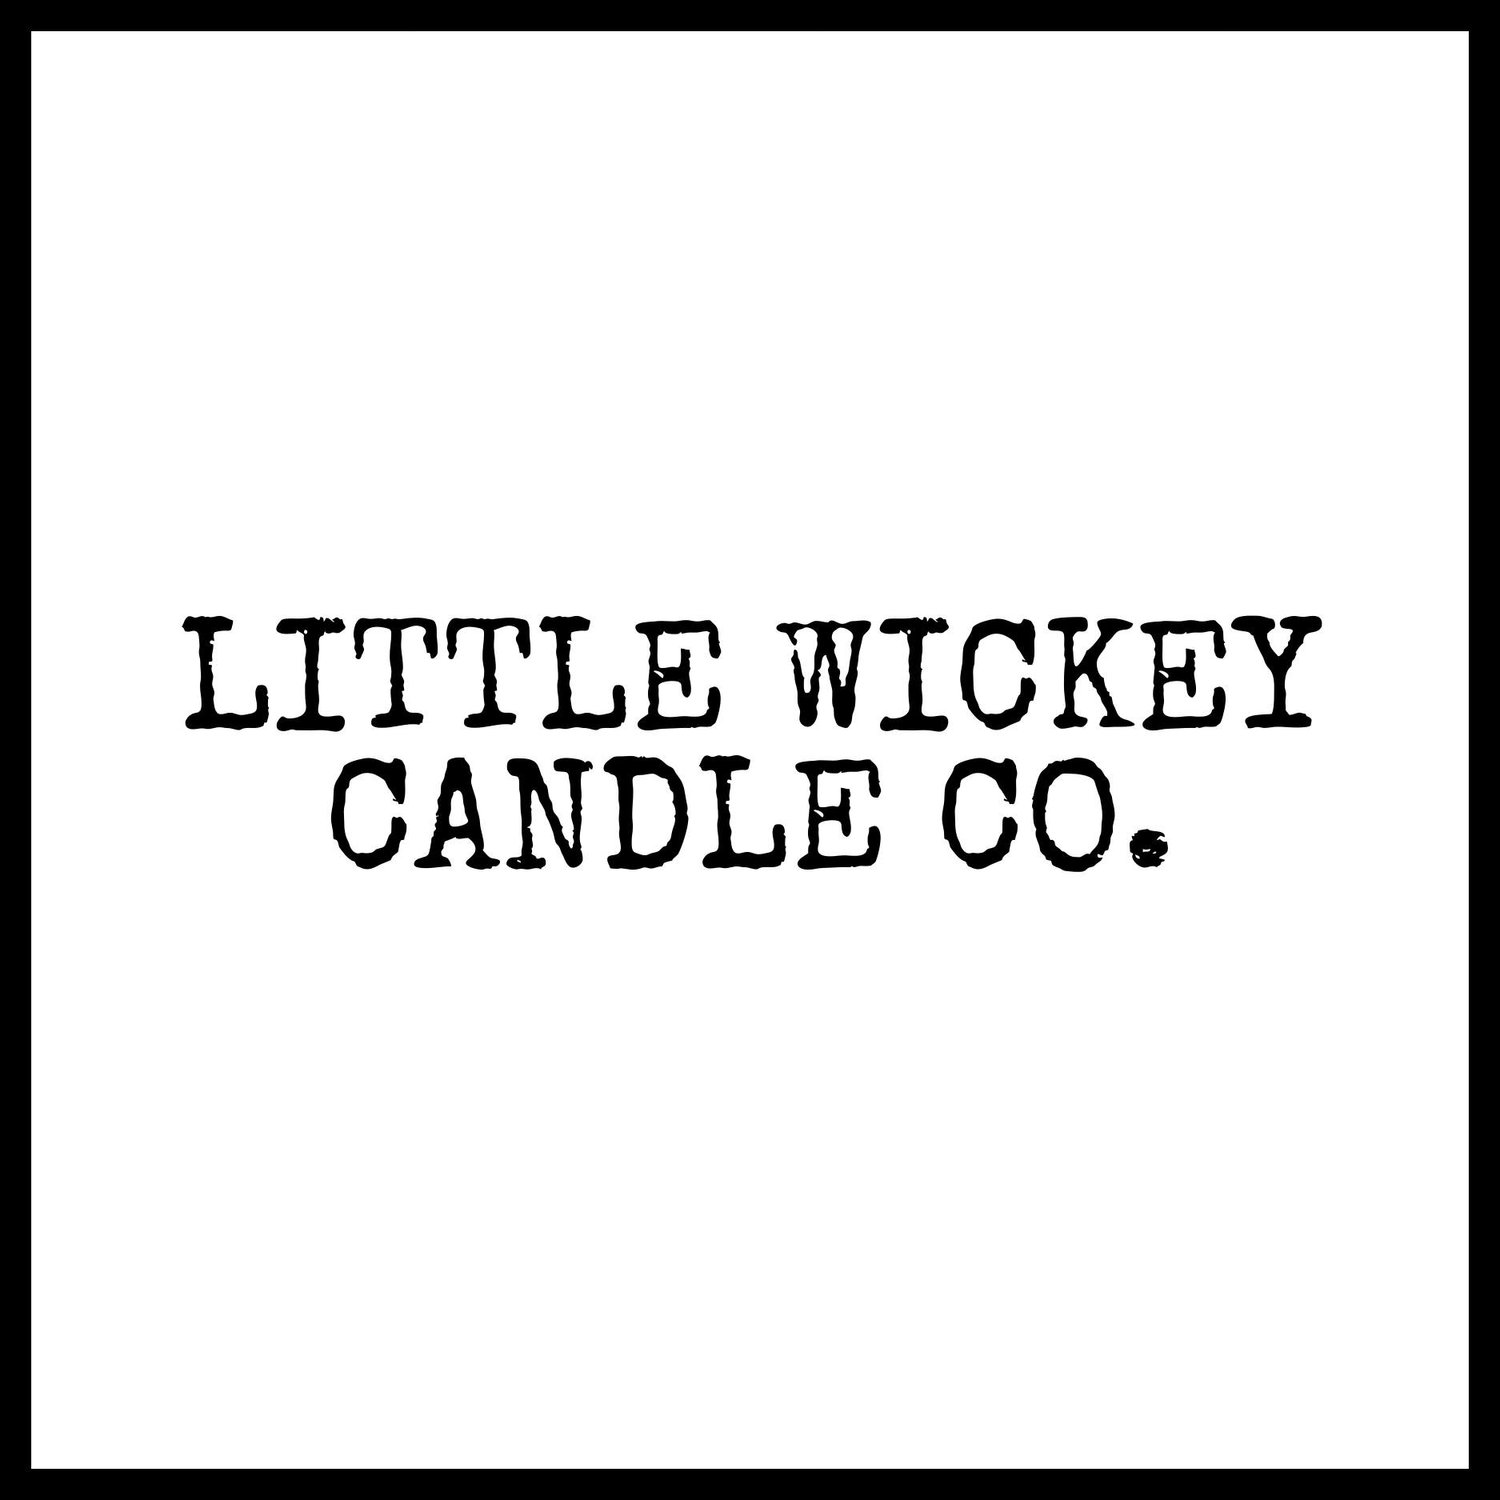 Little Wickey Candle Co.